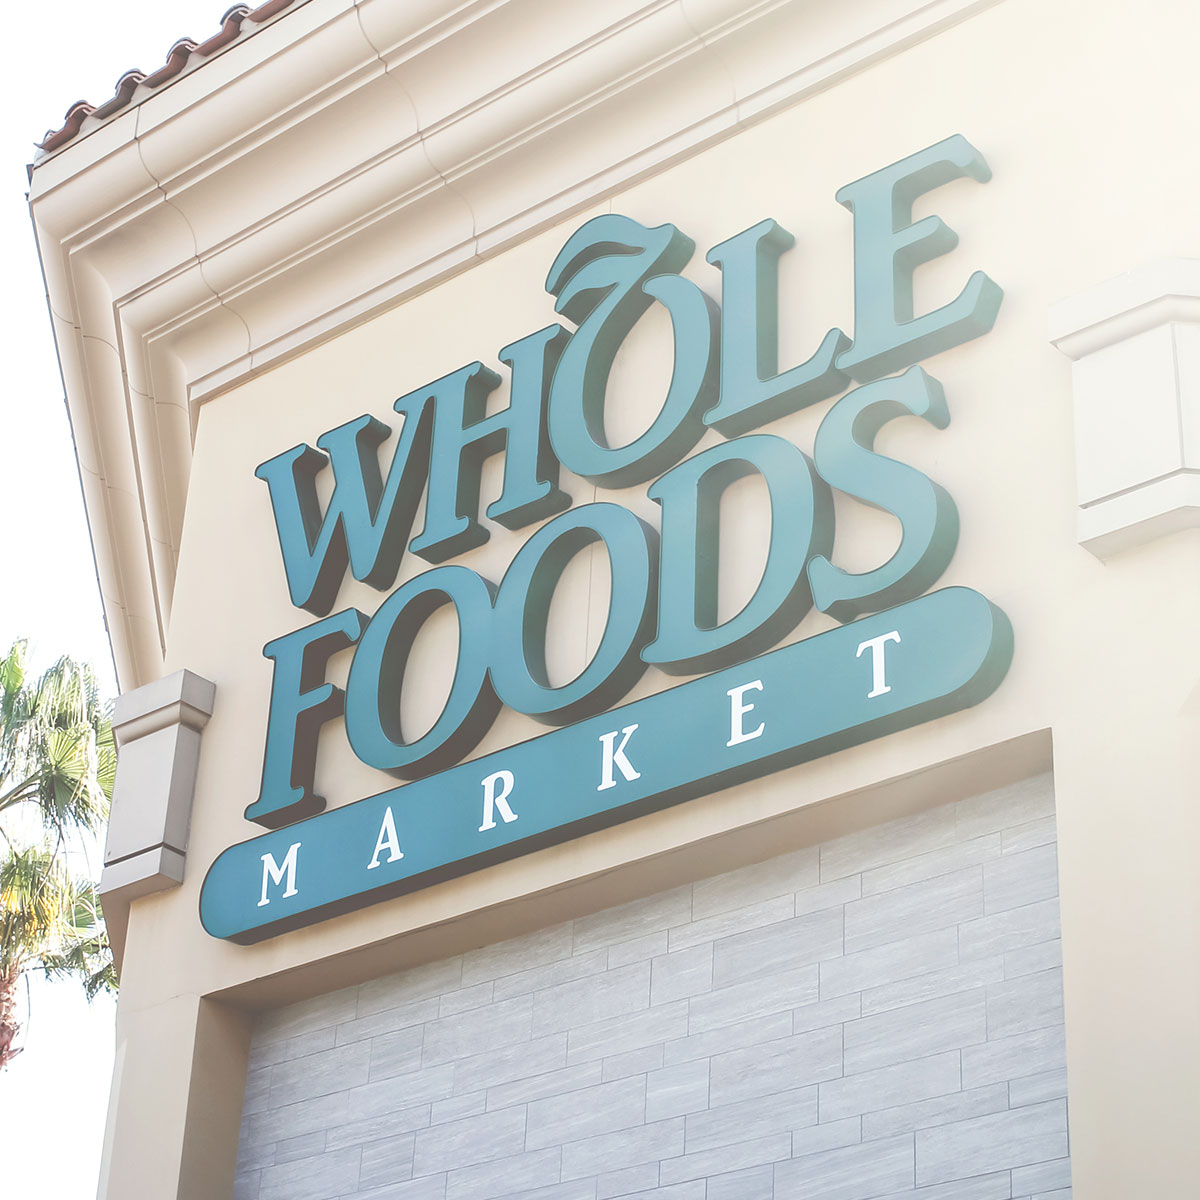 Customers Complain About Whole Foods Prepared Foods After Reporting Quality  Issues: 'Cutting Corners' - SHEfinds